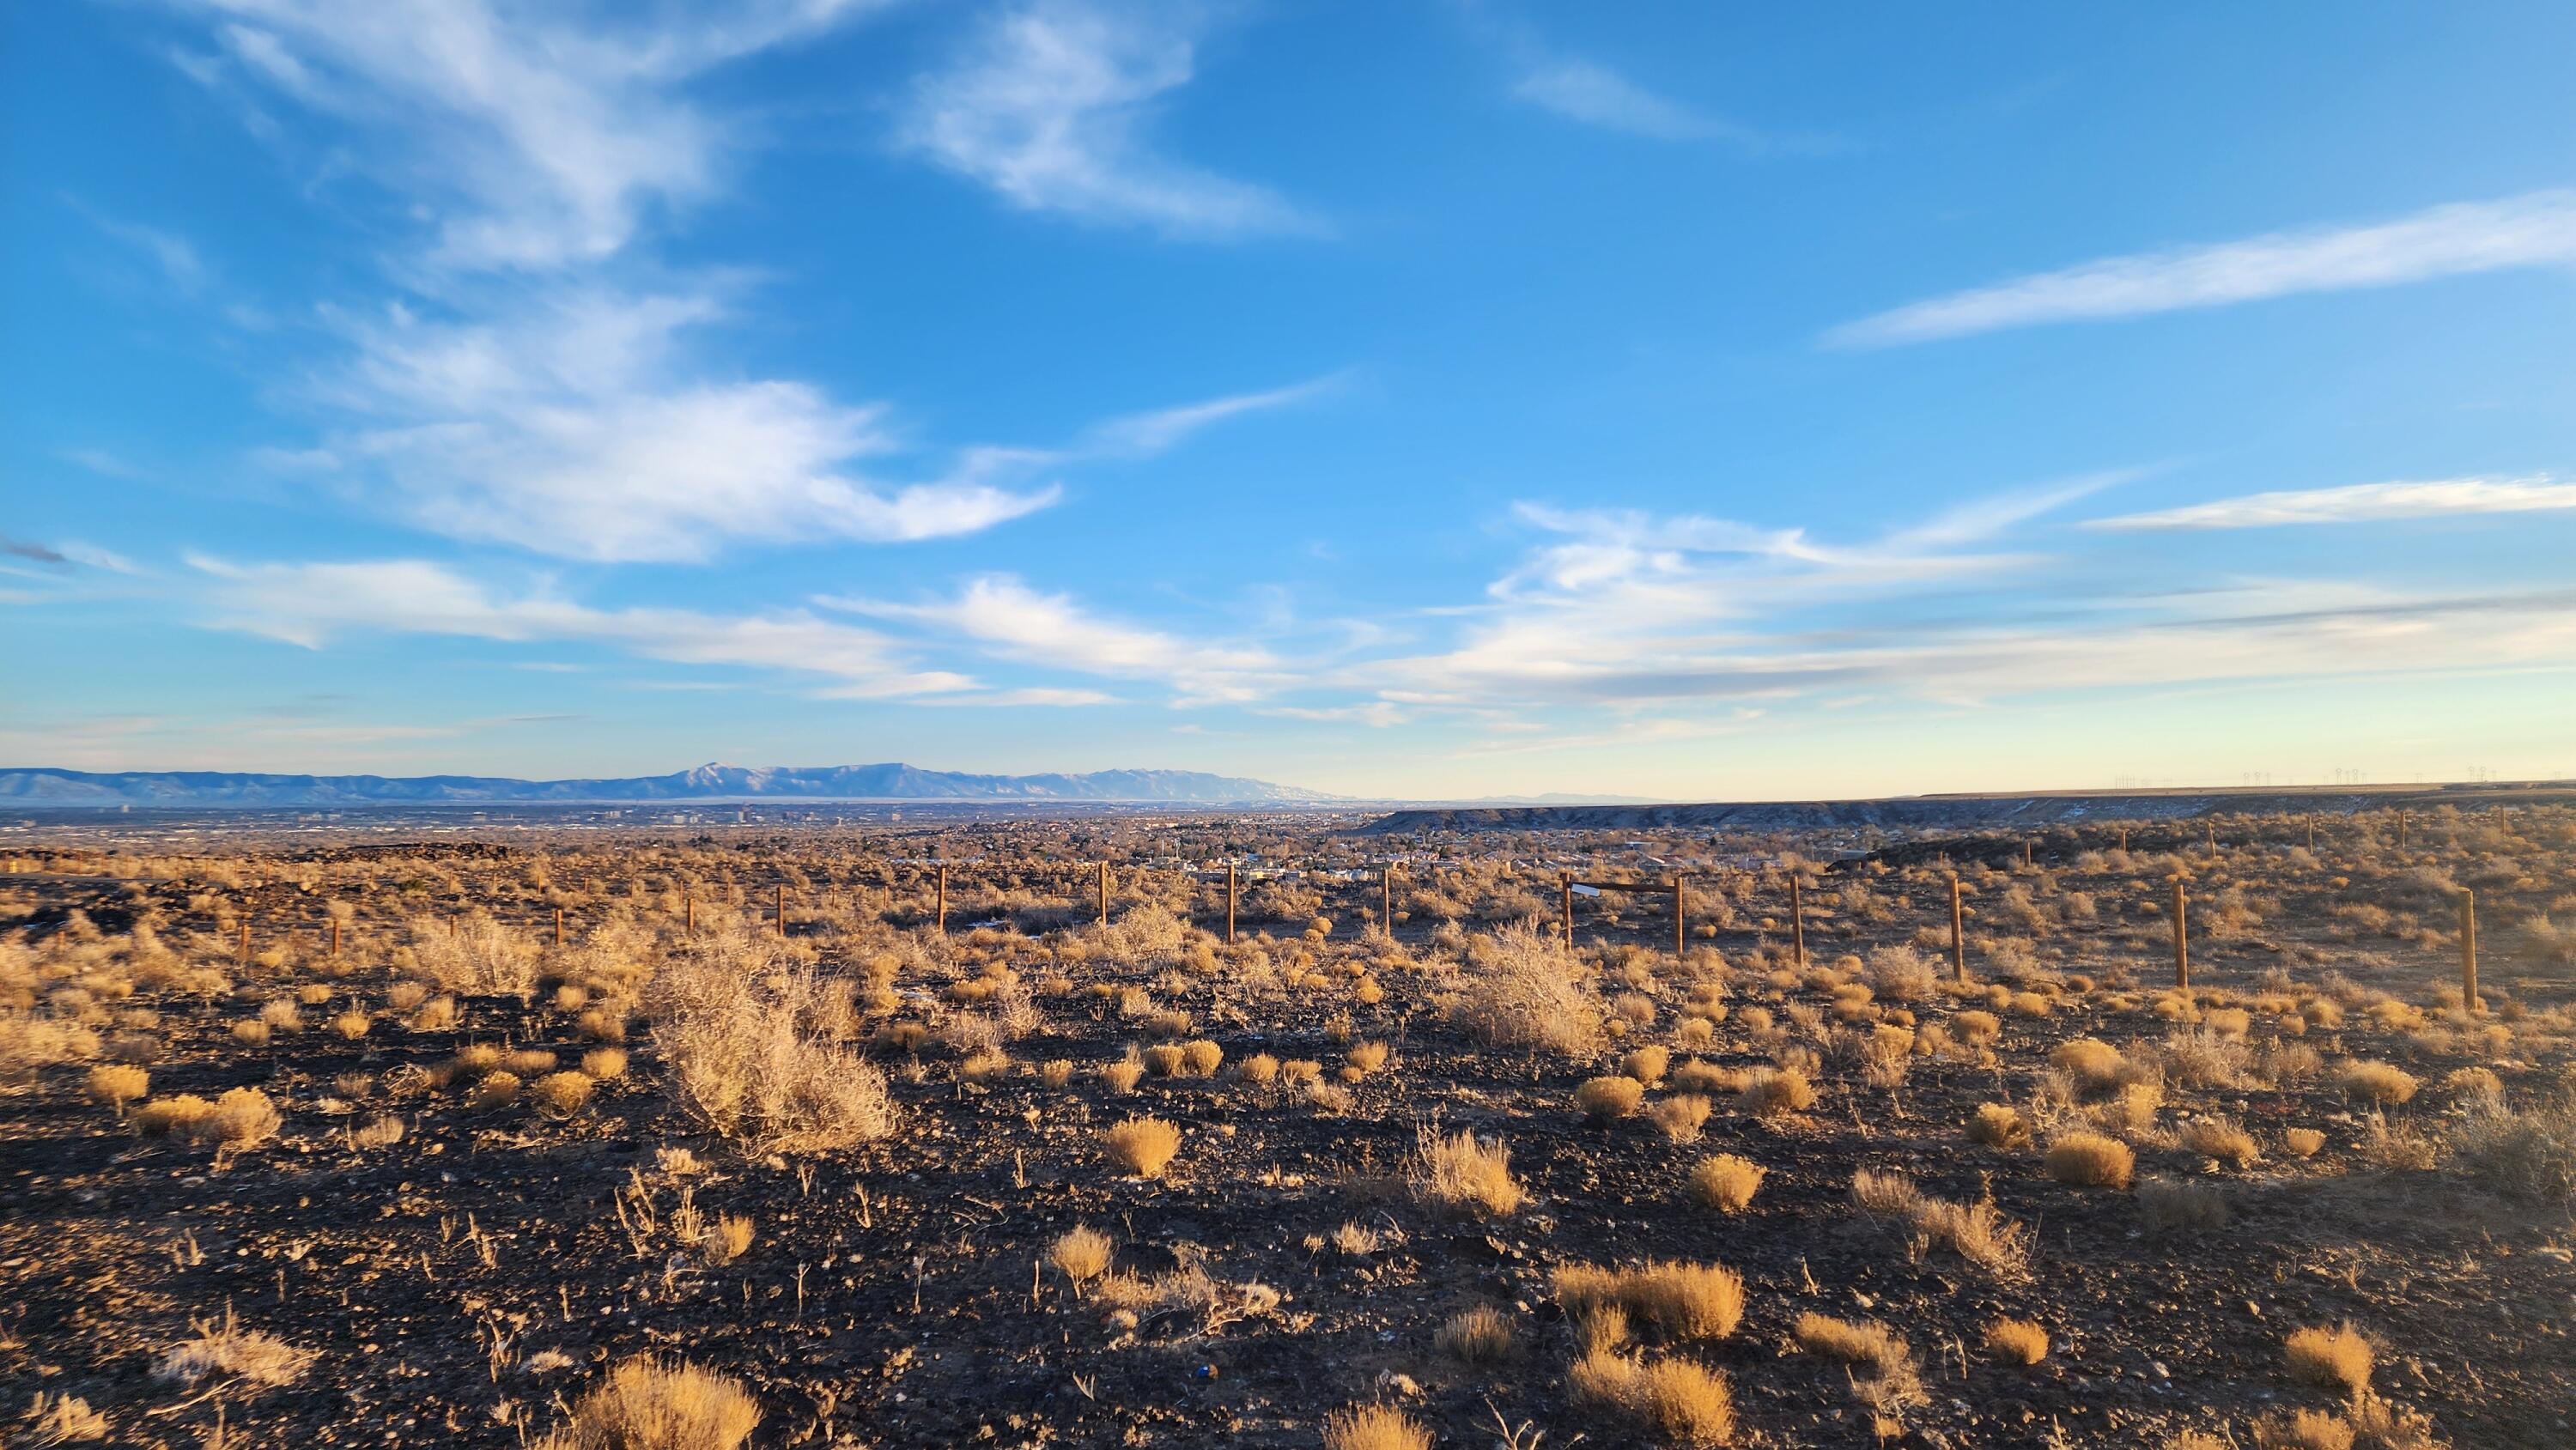 Lot 20 Don Julio Road, Corrales, New Mexico 87048, ,Land,For Sale,Lot 20 Don Julio Road,1060713